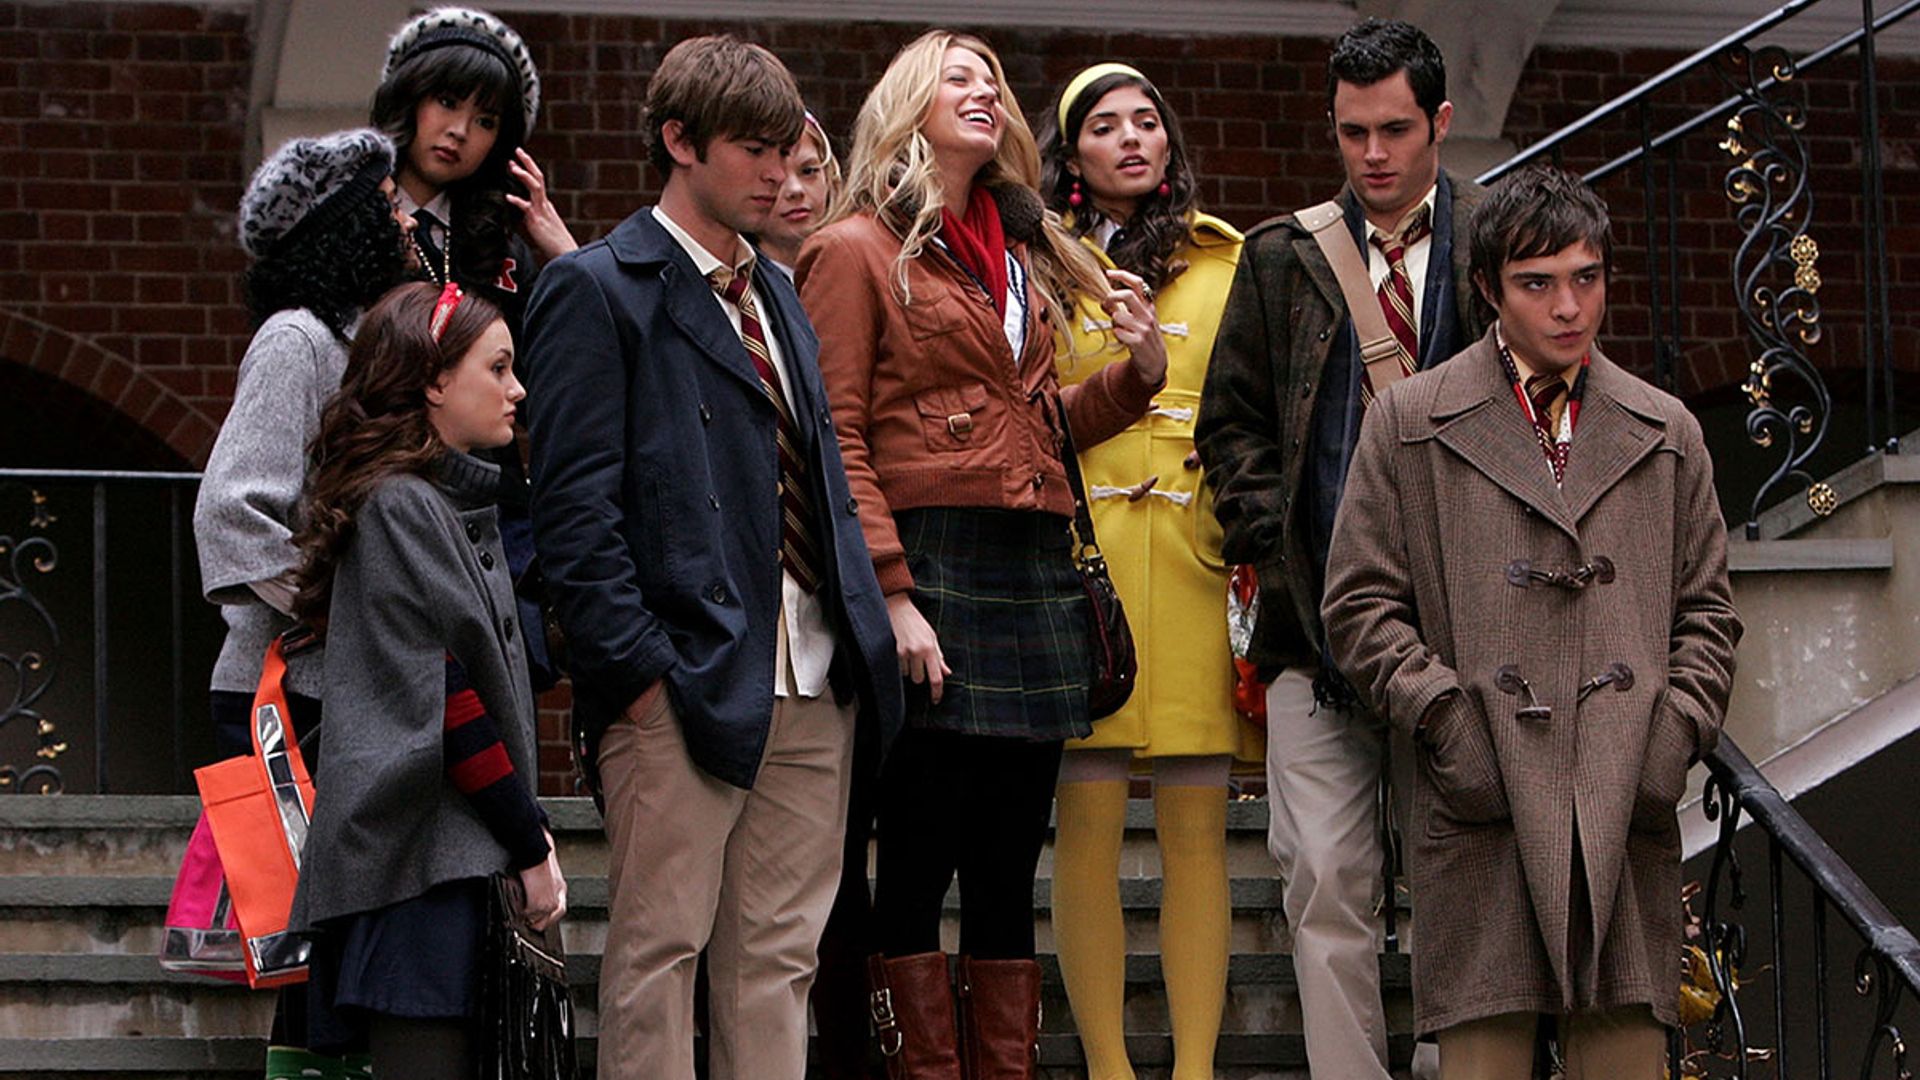 Gossip Girl fans outraged after Netflix's plan to remove show from